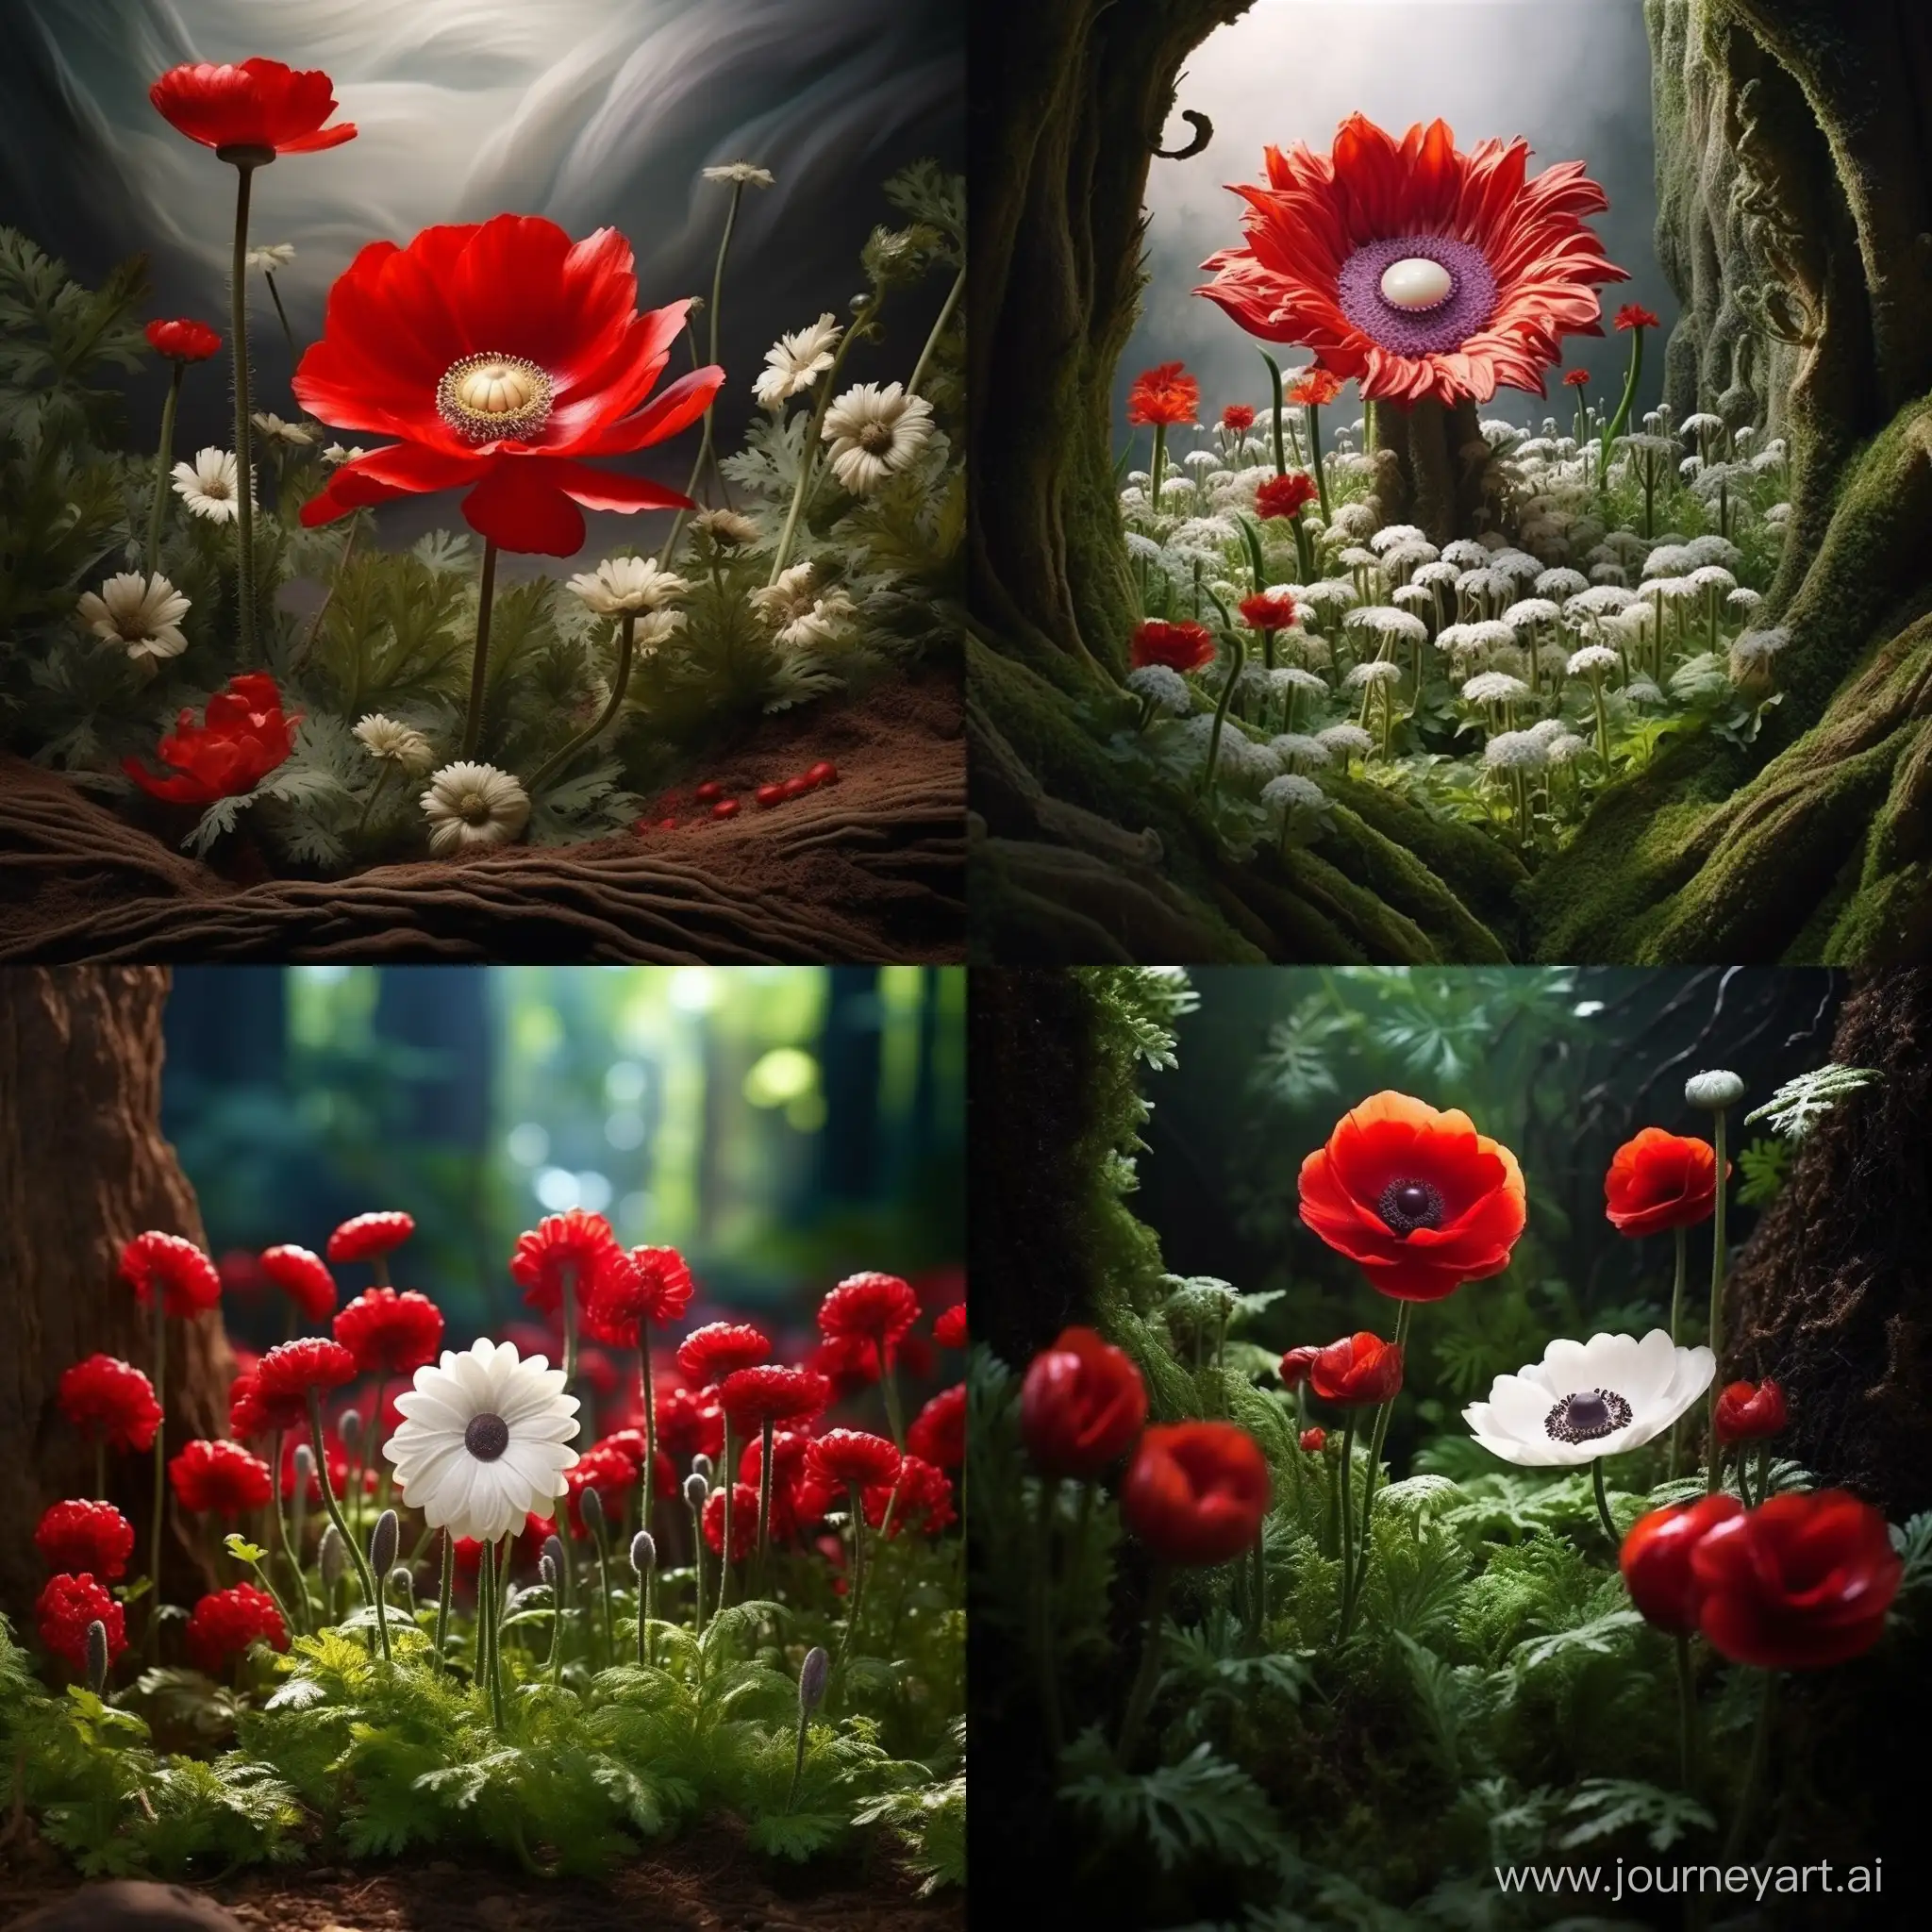 Vibrant-Red-Anemone-Garden-in-a-Blank-Canvas-Landscape